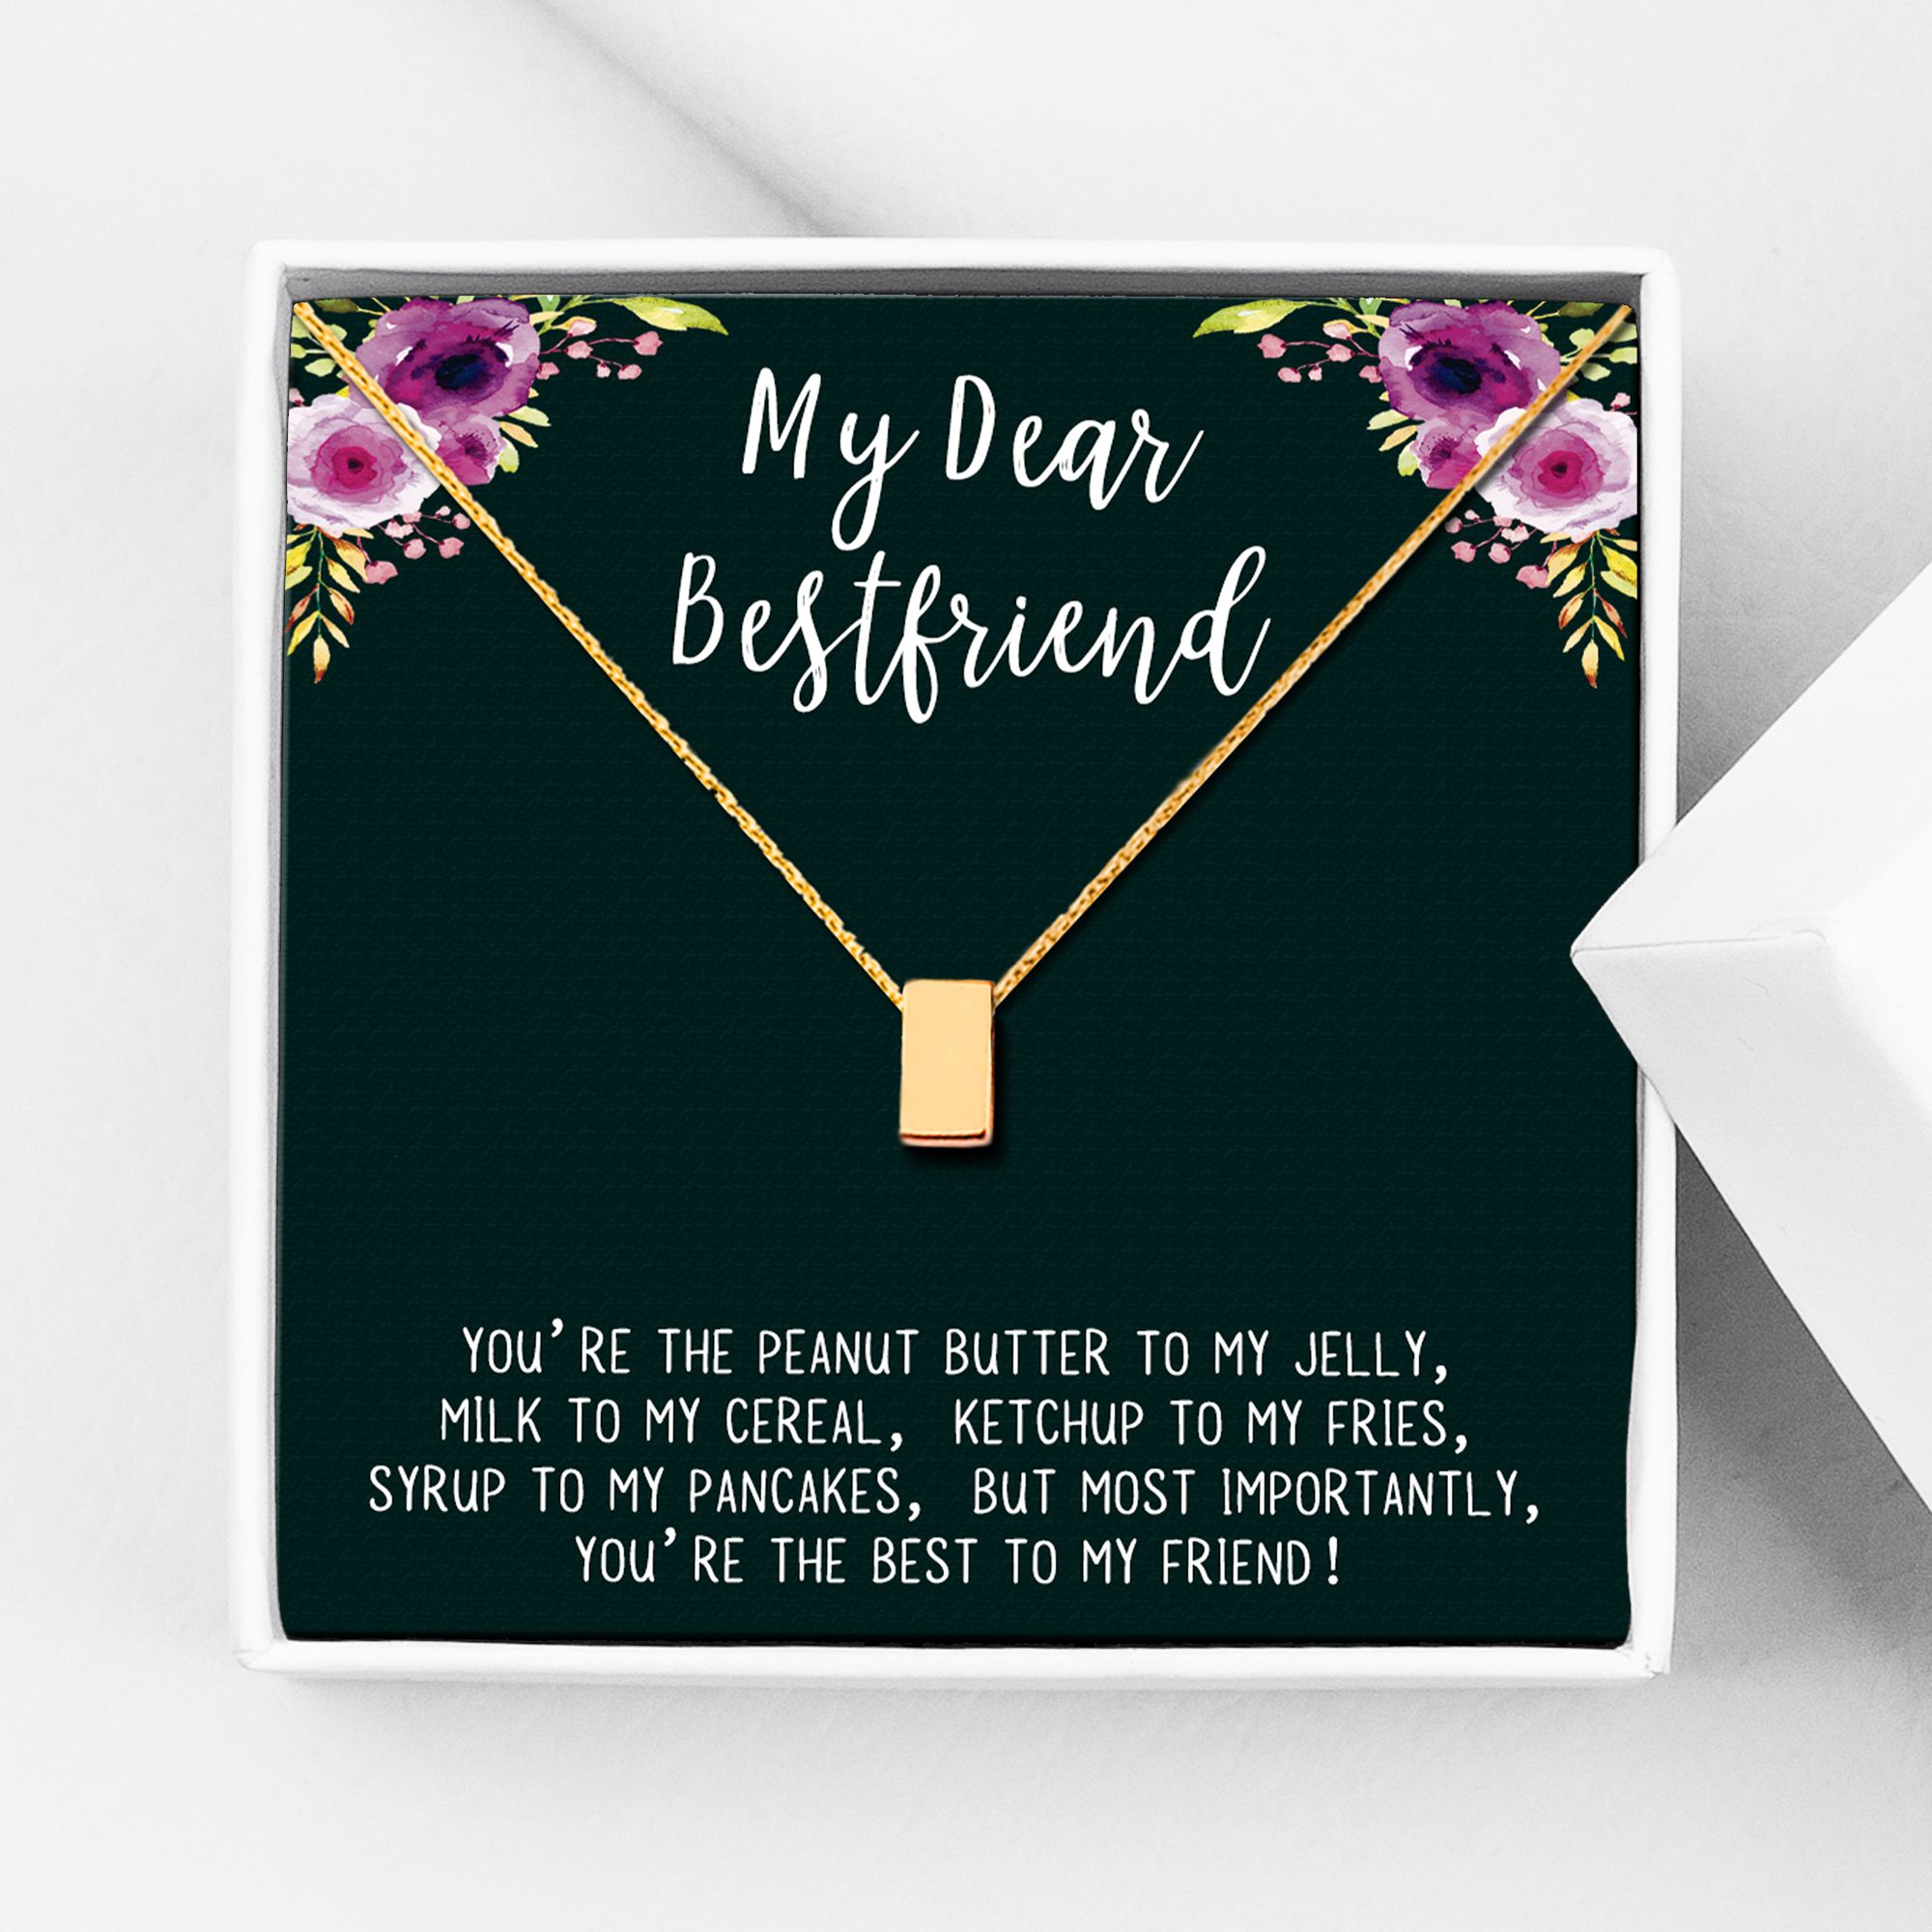 Anavia Best Friend Necklace, Friendship Jewelry, Best Friend Gifts, Gift for Friend, Birthday Gift, Christmas Gift for Her, Cube Pendant Necklace with Wish Card -[Gold Charm] - image 1 of 6